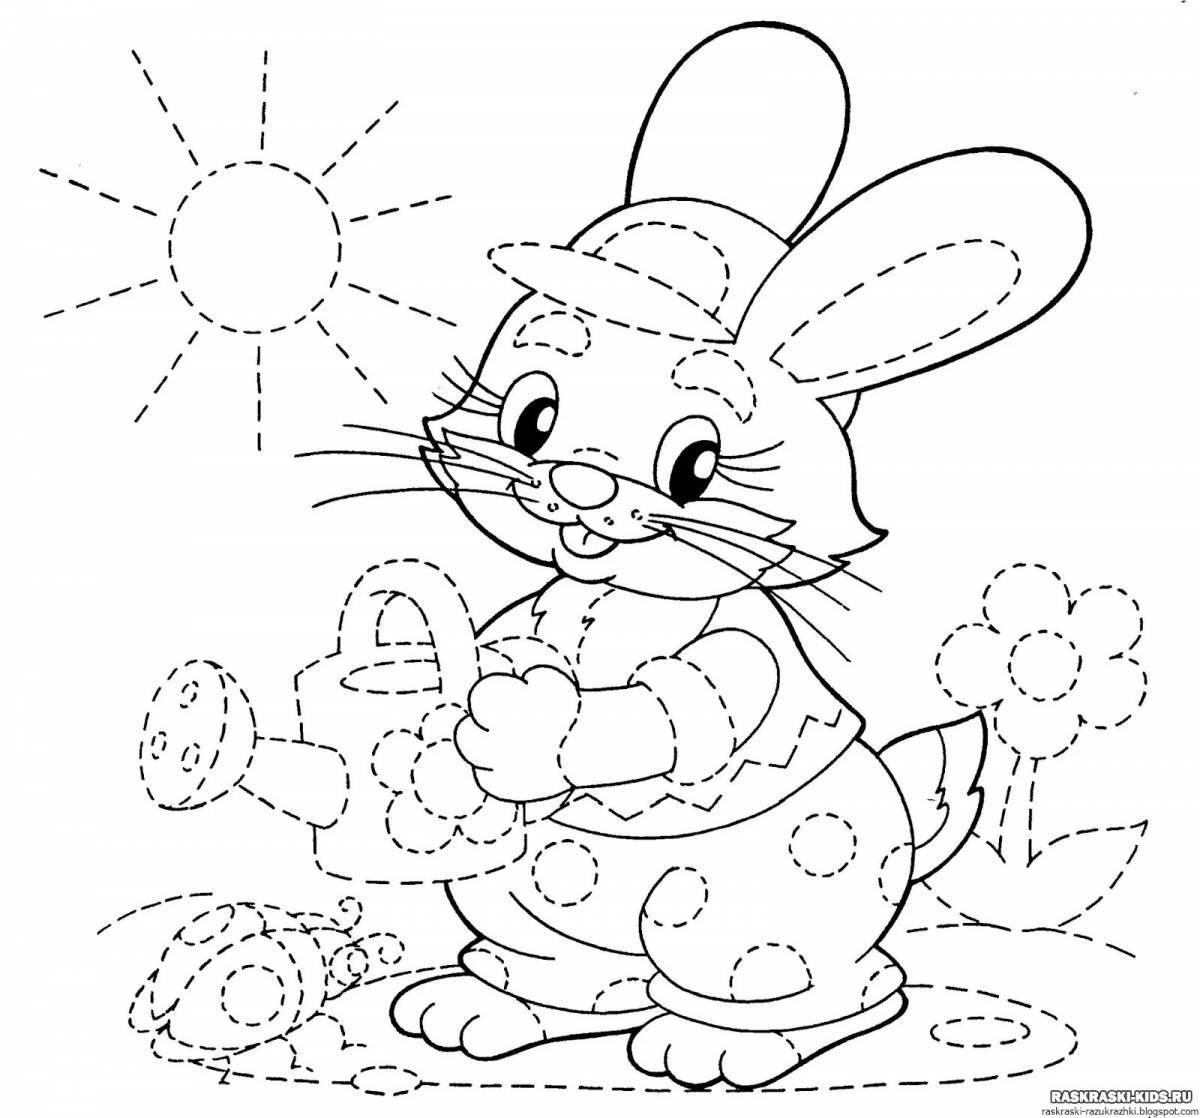 Colorful coloring book for preschoolers 5-6 years old